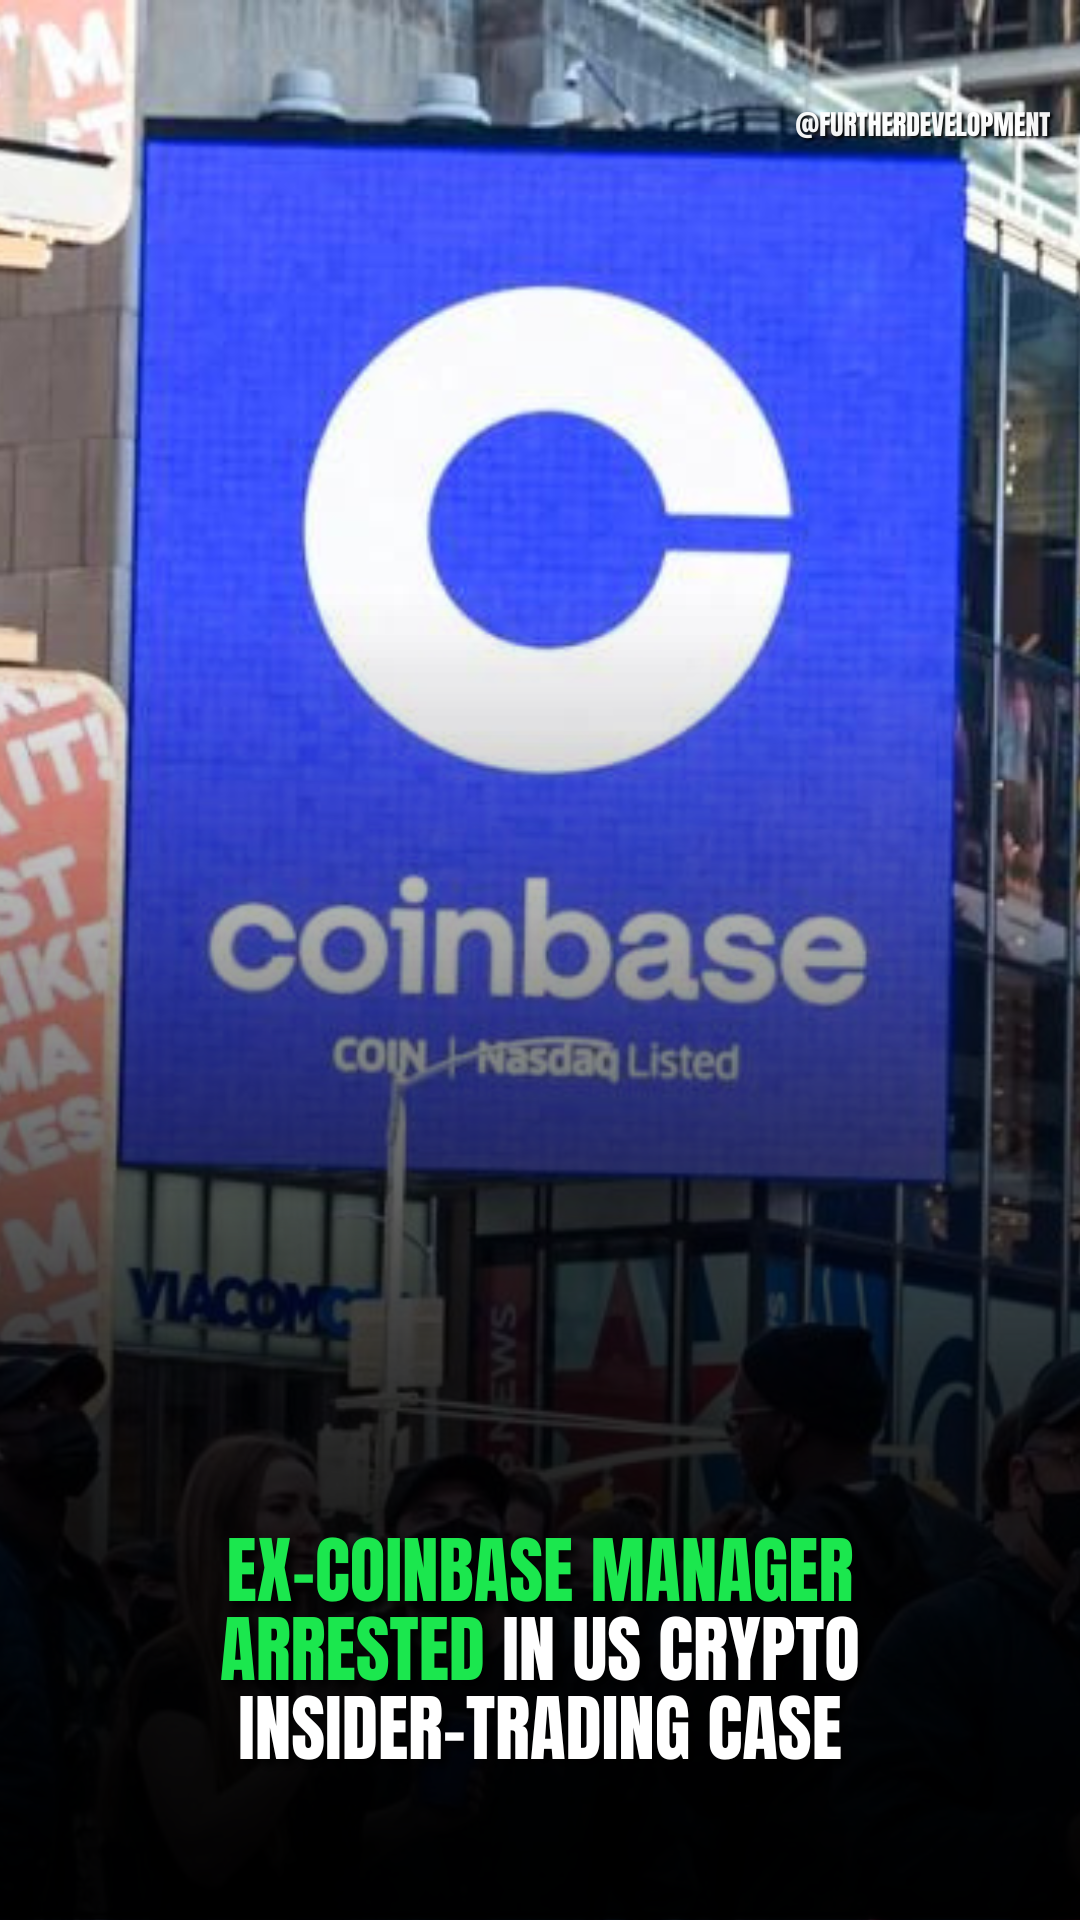 Ex-Coinbase manager arrested in US crypto insider-trading case